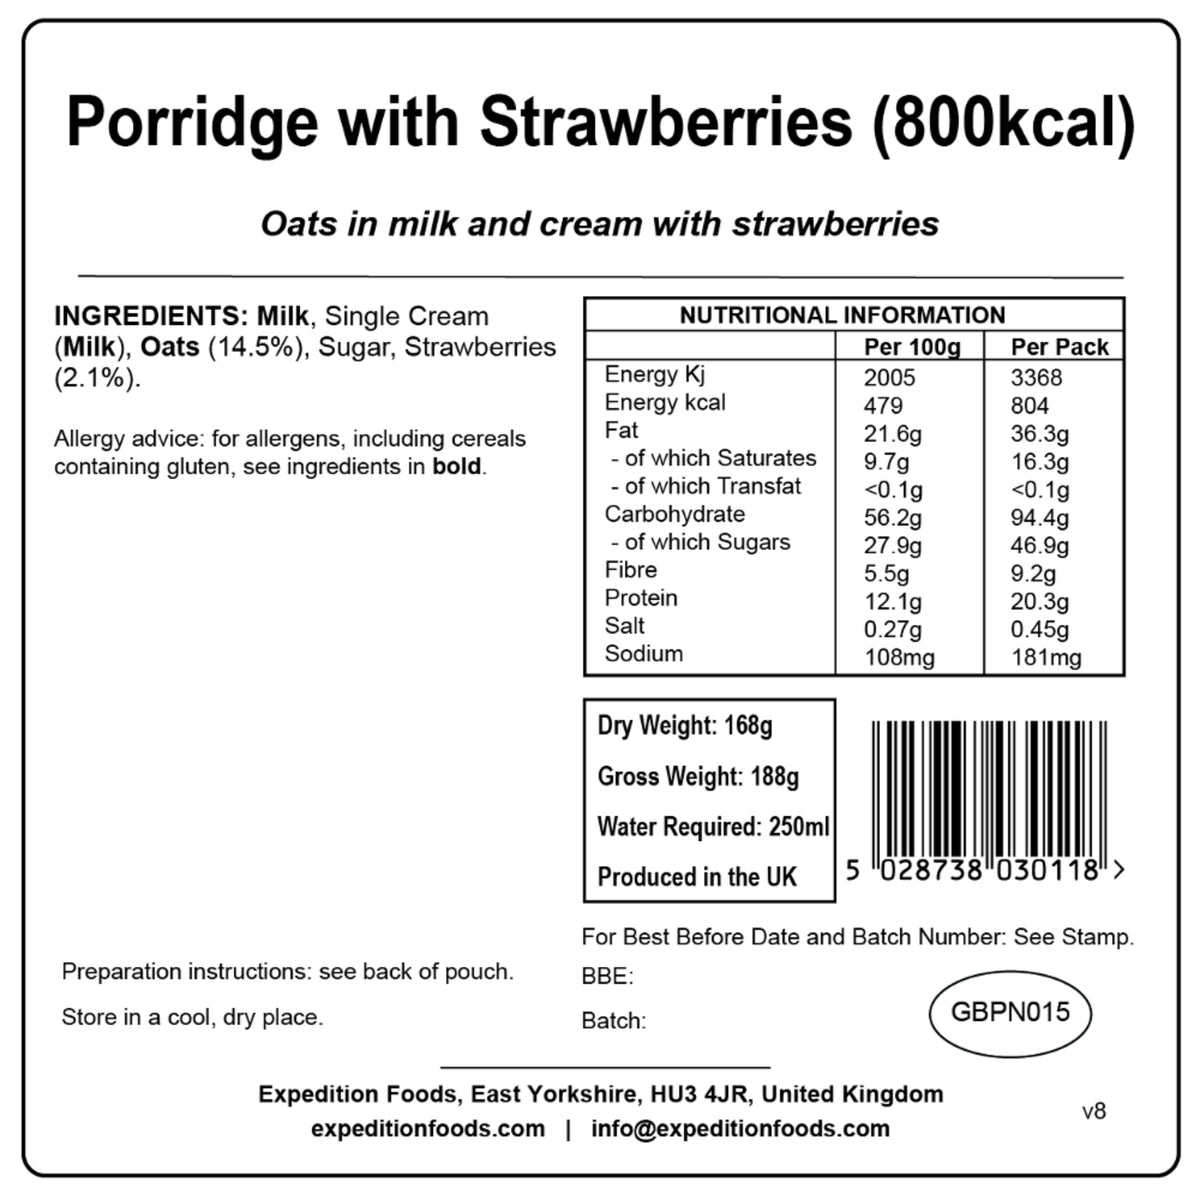 Expedition Foods Porridge with Strawberries (800kcal), dried camping food pack